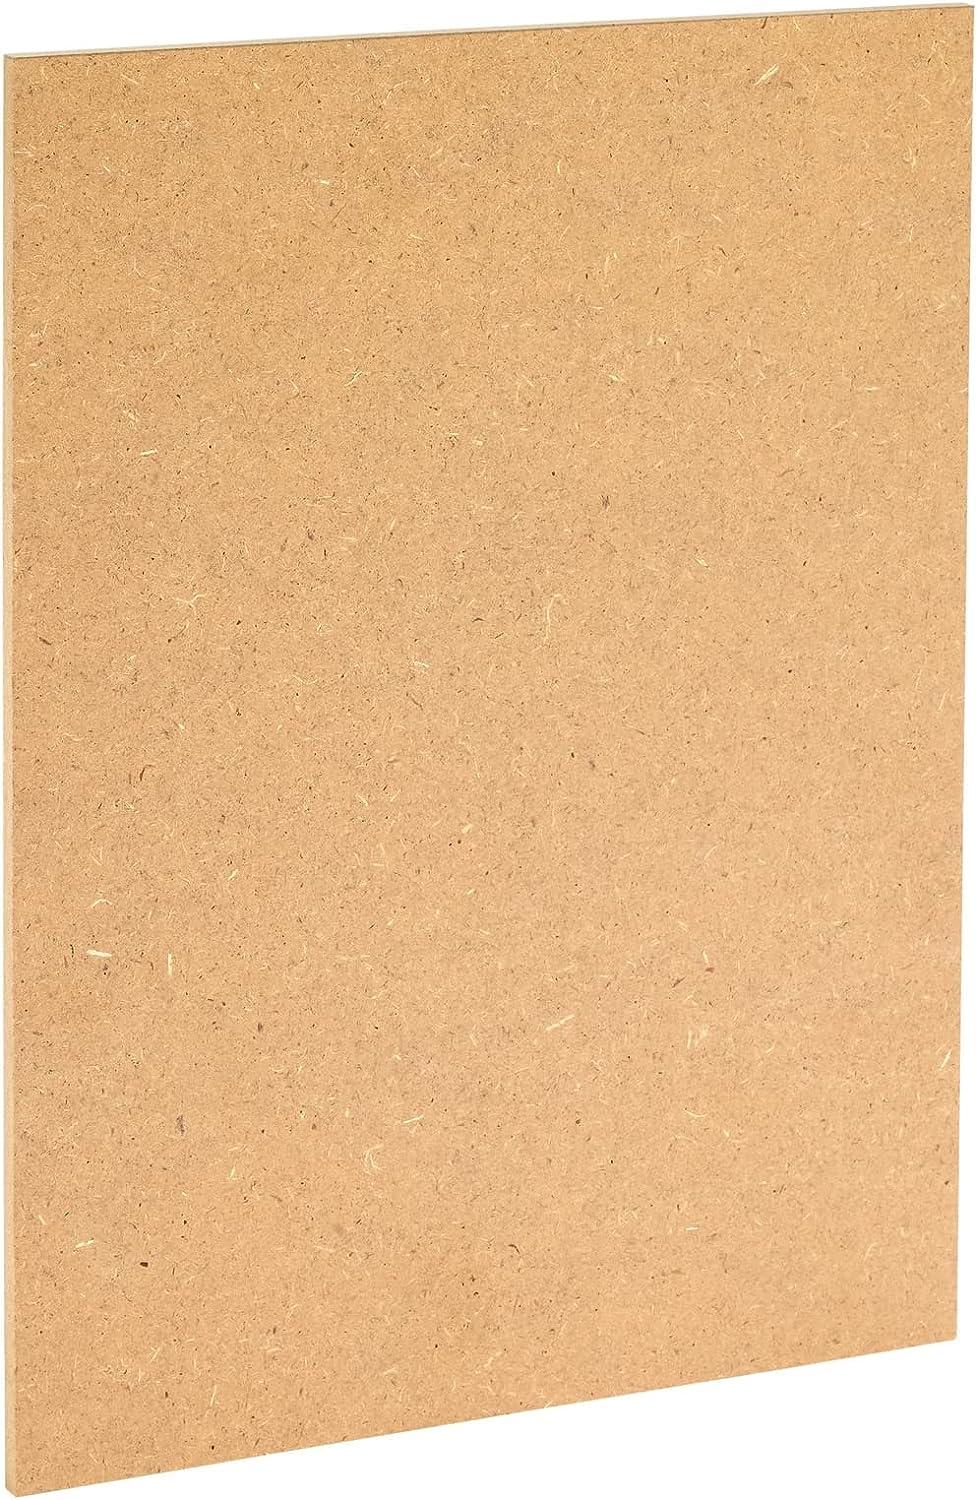 0.25 Thick Blank MDF Chipboard Sheets for Painting, Arts and Crafts (9 x  12 In, 12 Pack)